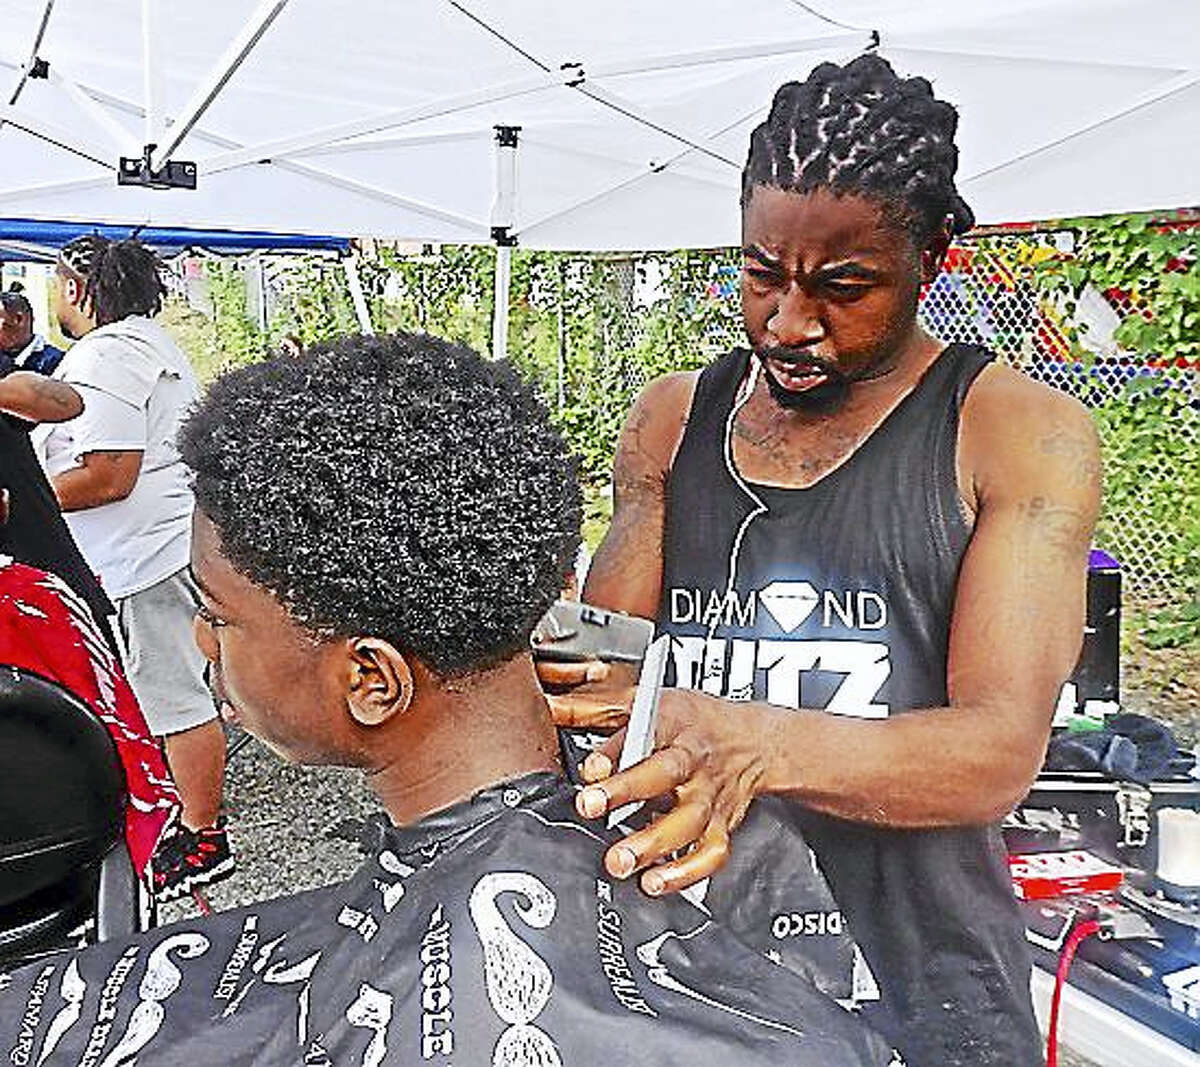 Diamond Cutz owner T.J. Green giving haircut to Jymere Jones at past rally.